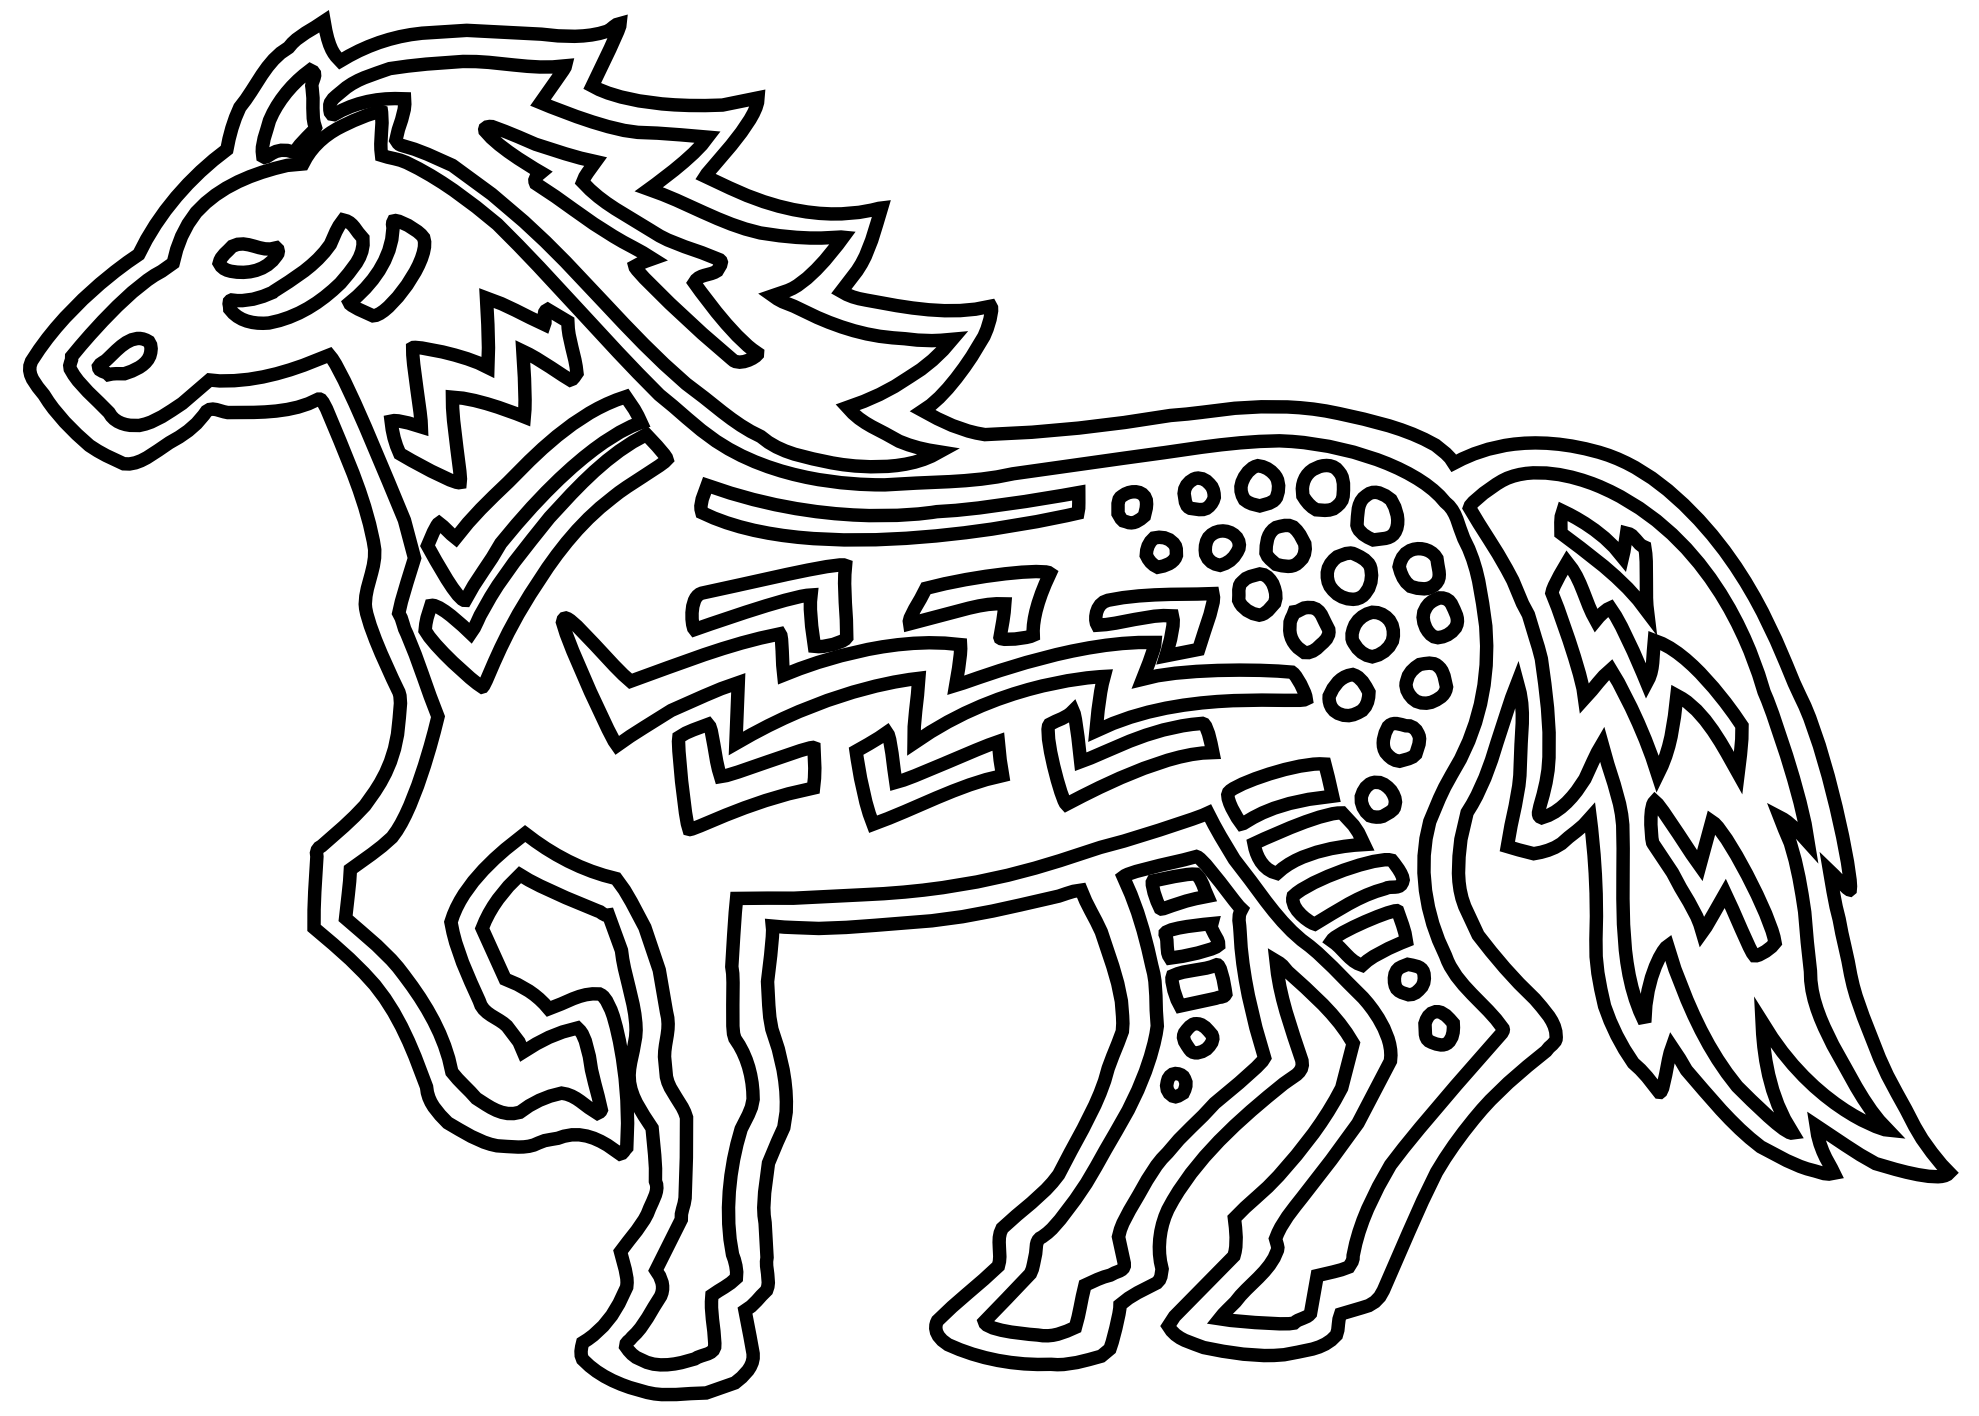 Figurative Horse Black White Line Art Coloring Sheet Colouring Page